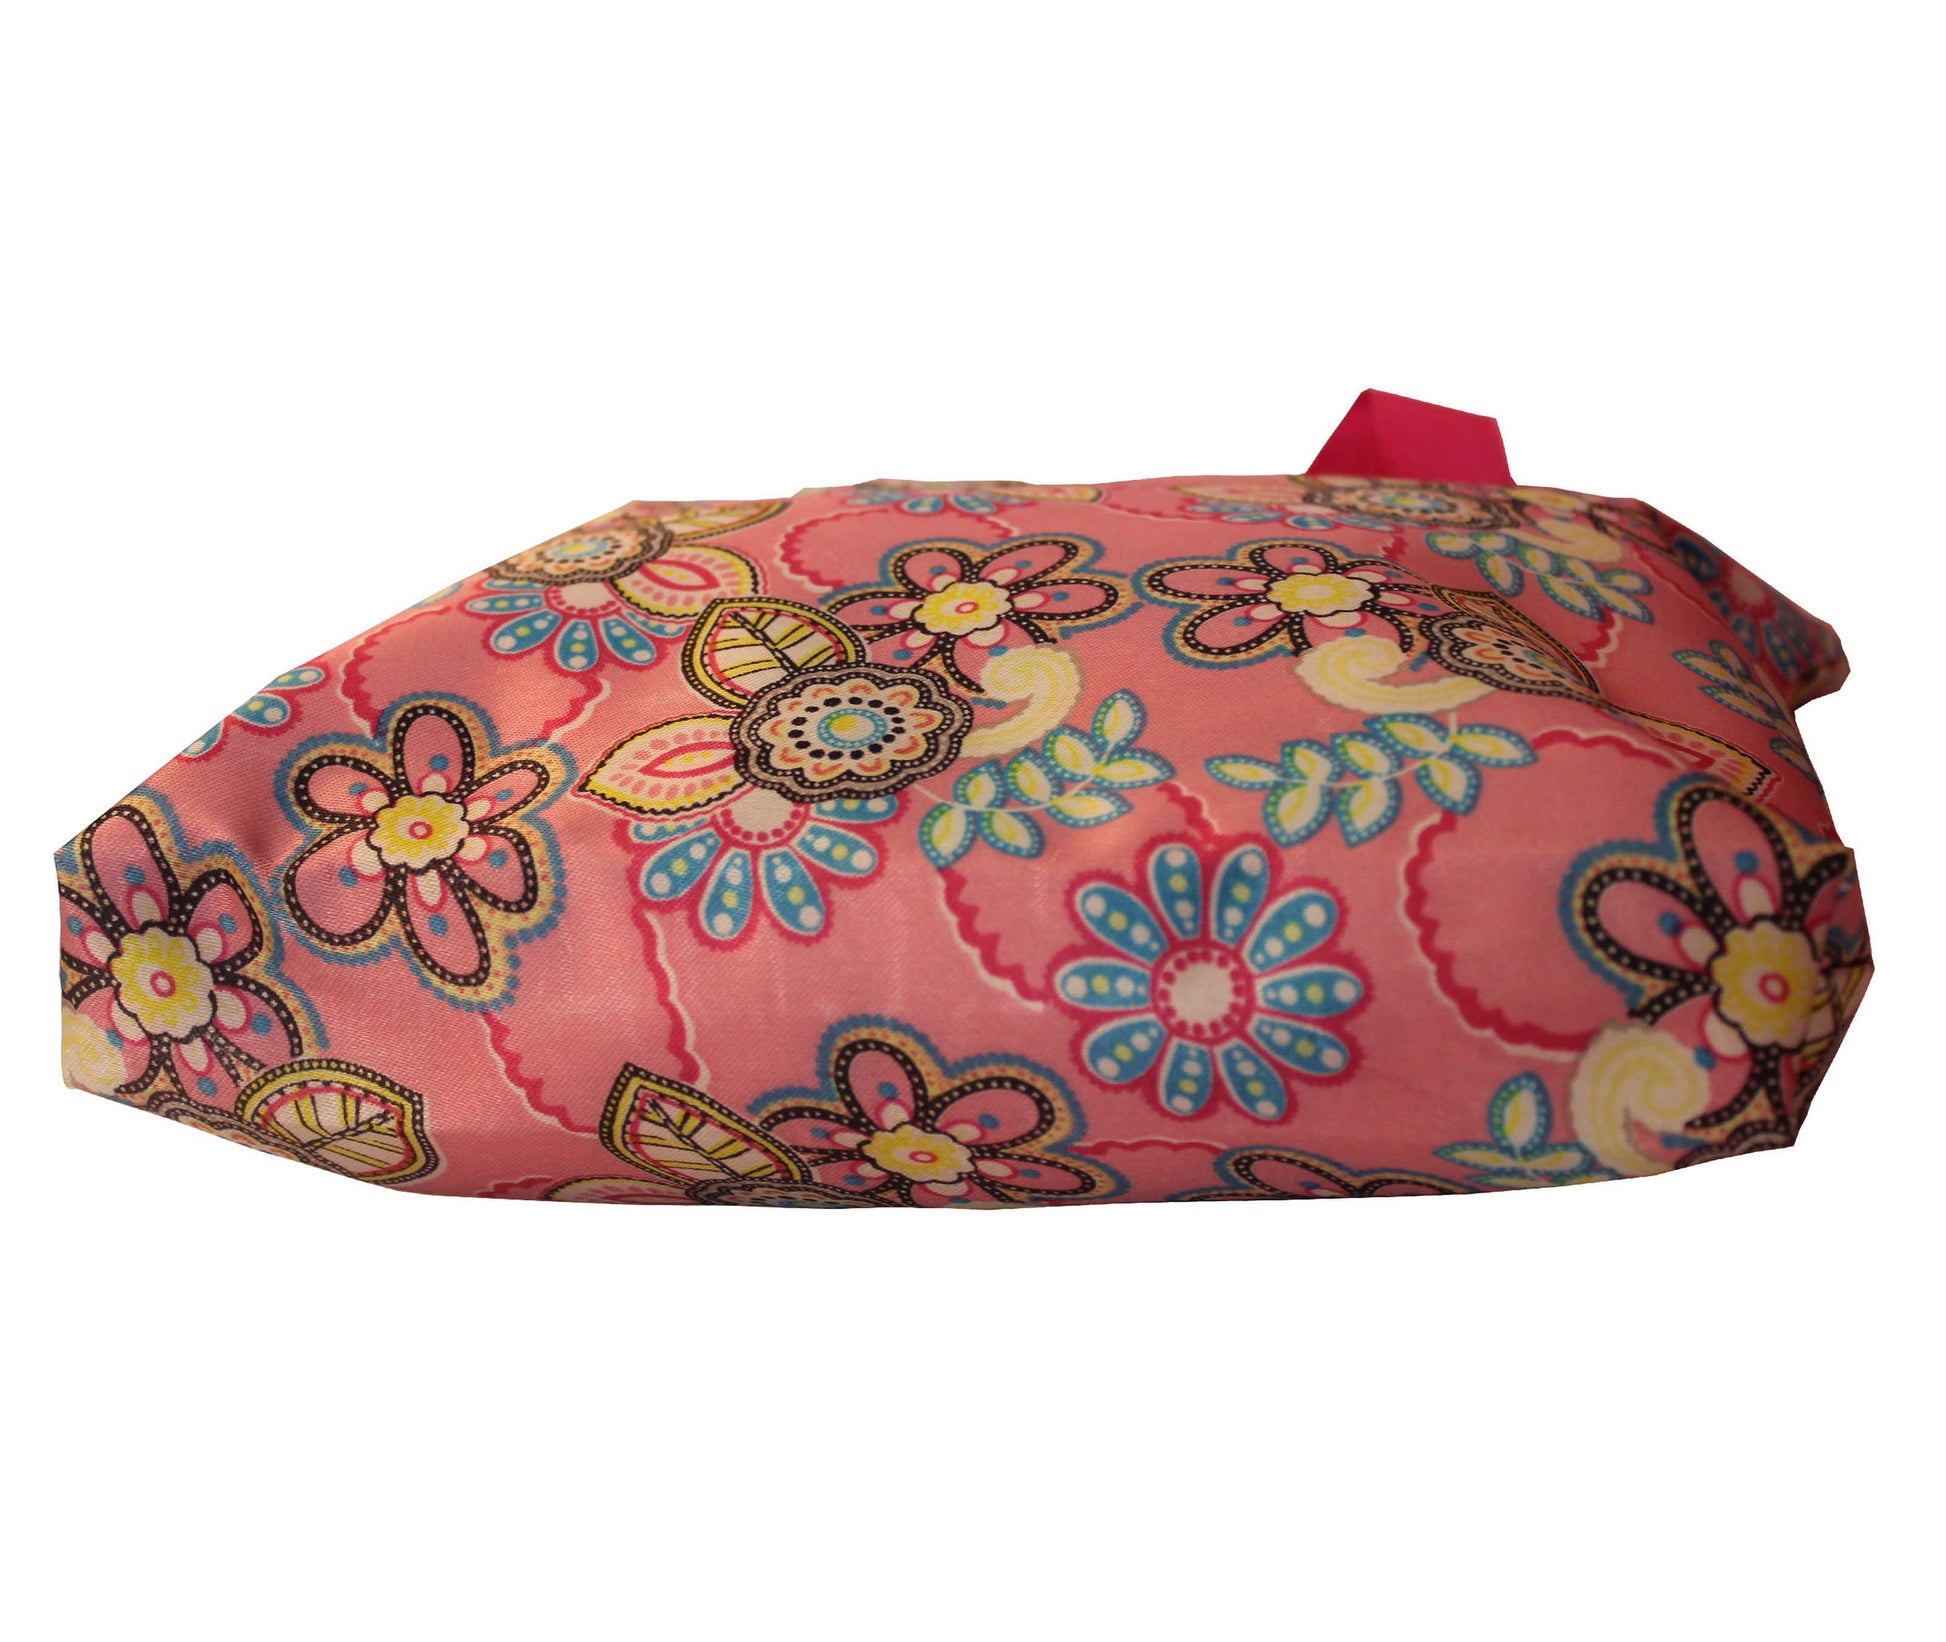 Indian Petals Imported Durable Canvas Printed multi purpose Bag with handles for girls and ladies, Theme Floral, Size Large